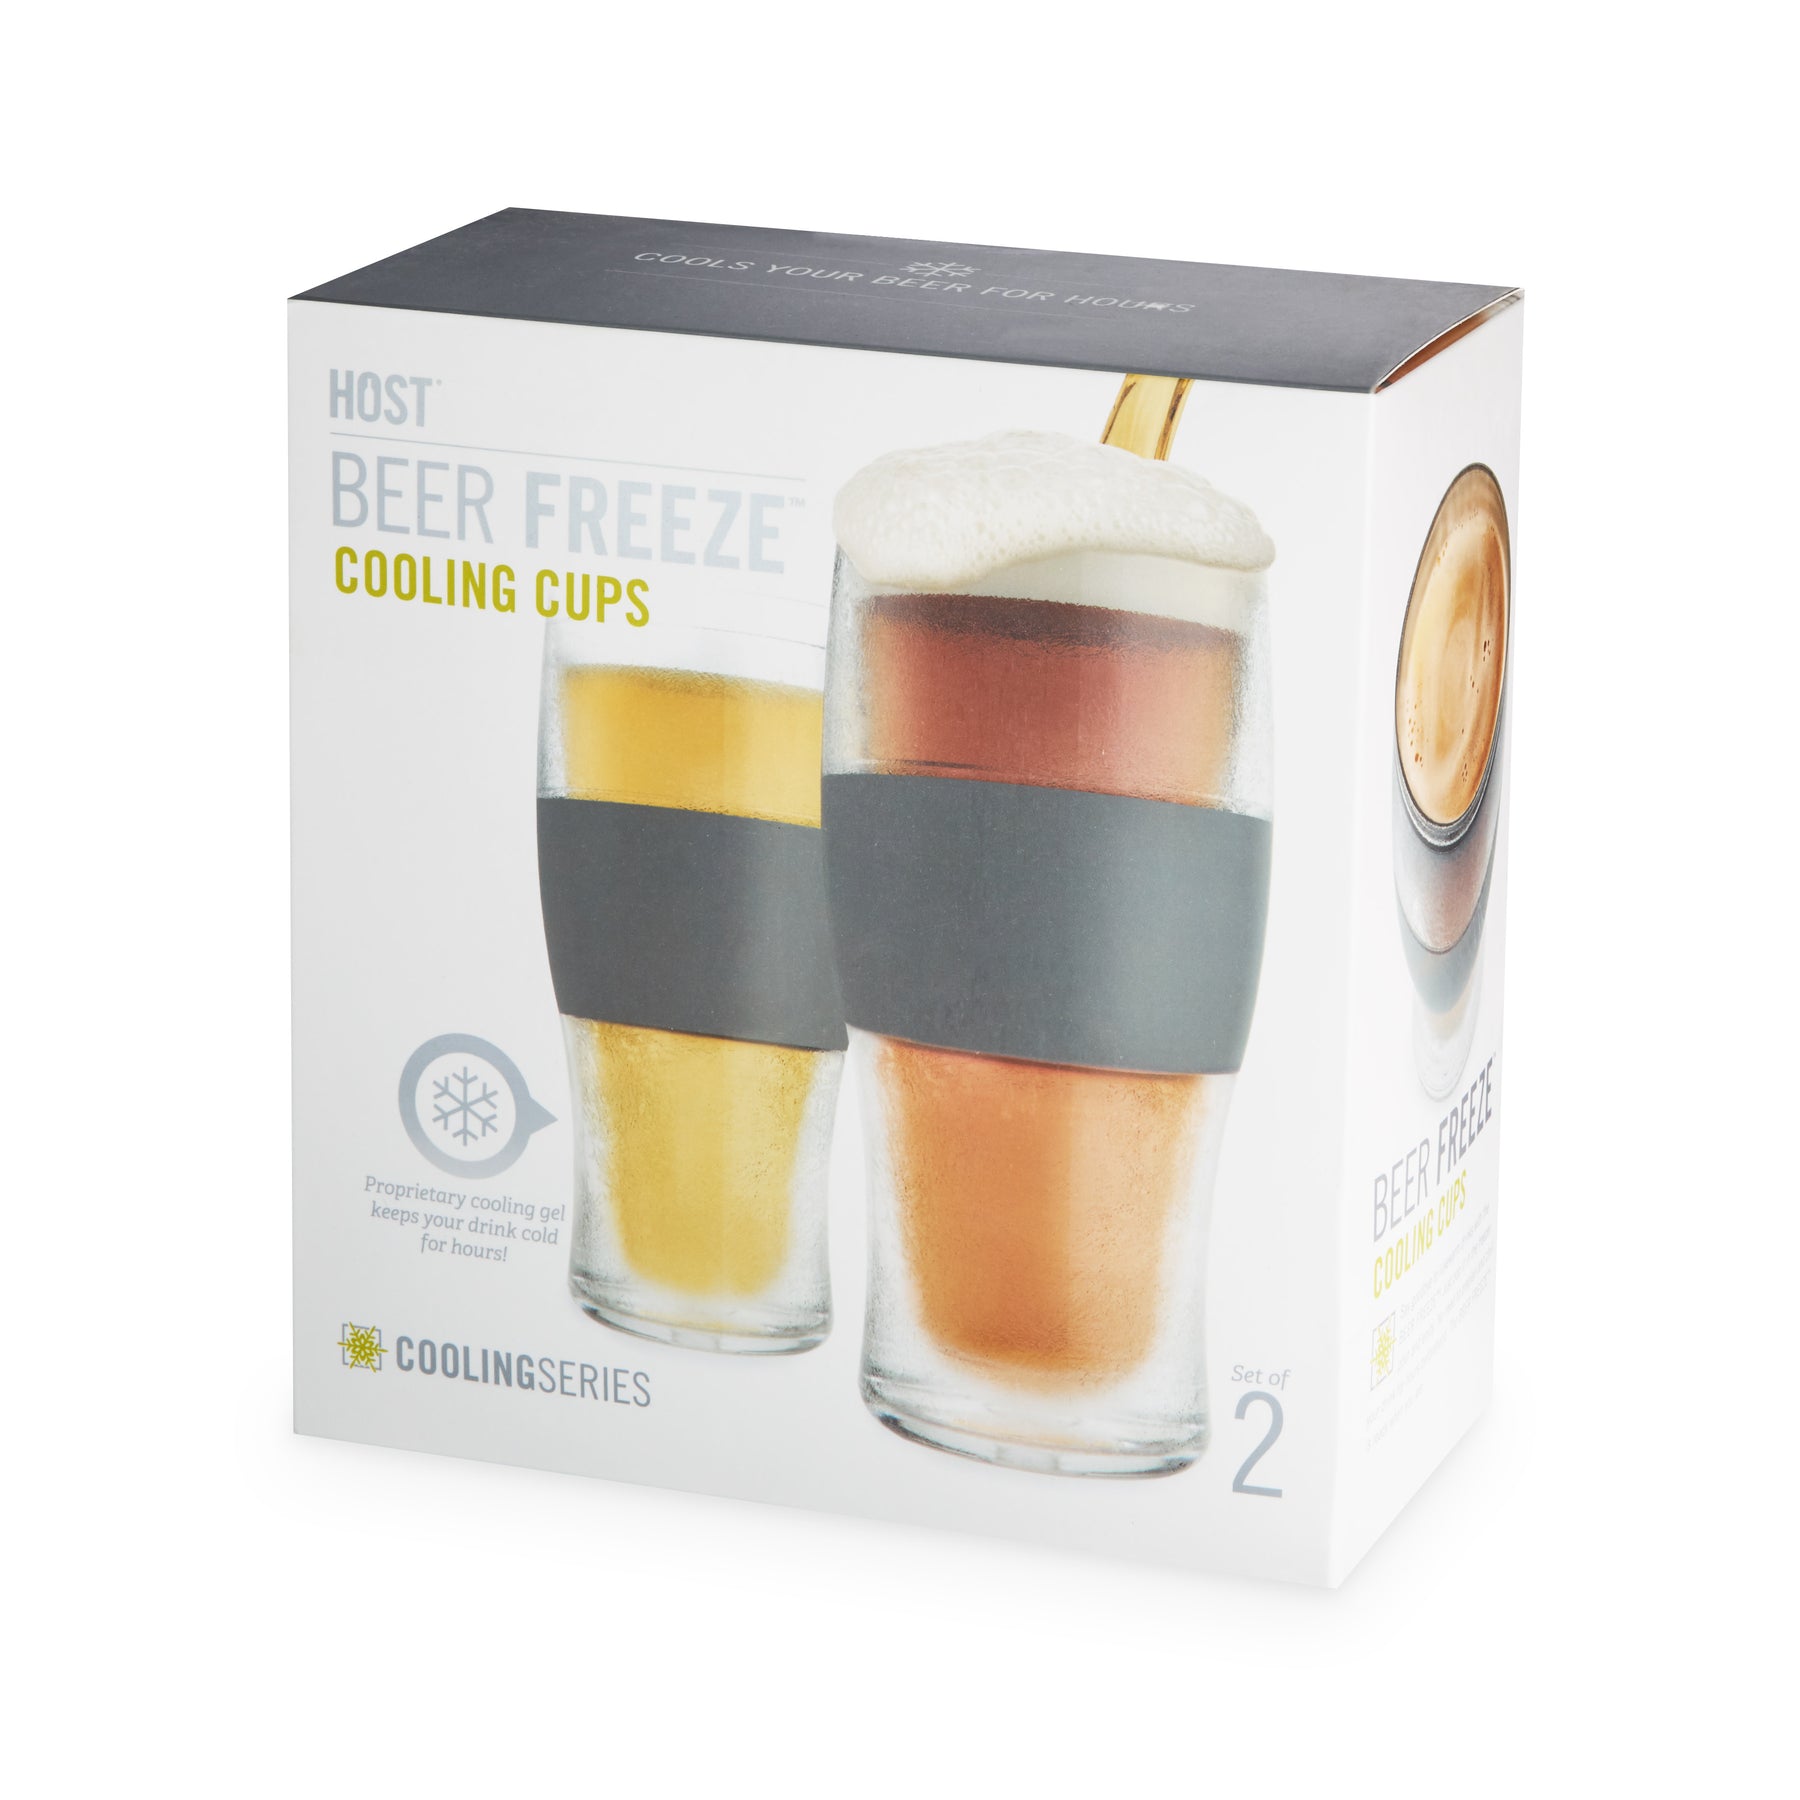 Host FREEZE Beer Glasses, Frozen Beer Mugs, Freezable Pint Glass Set,  Insulated Beer Glass to Keep Your Drinks Cold, Double Walled Insulated  Glasses, Tumbler for Iced Coffee, 16oz, Set of 2, Gray